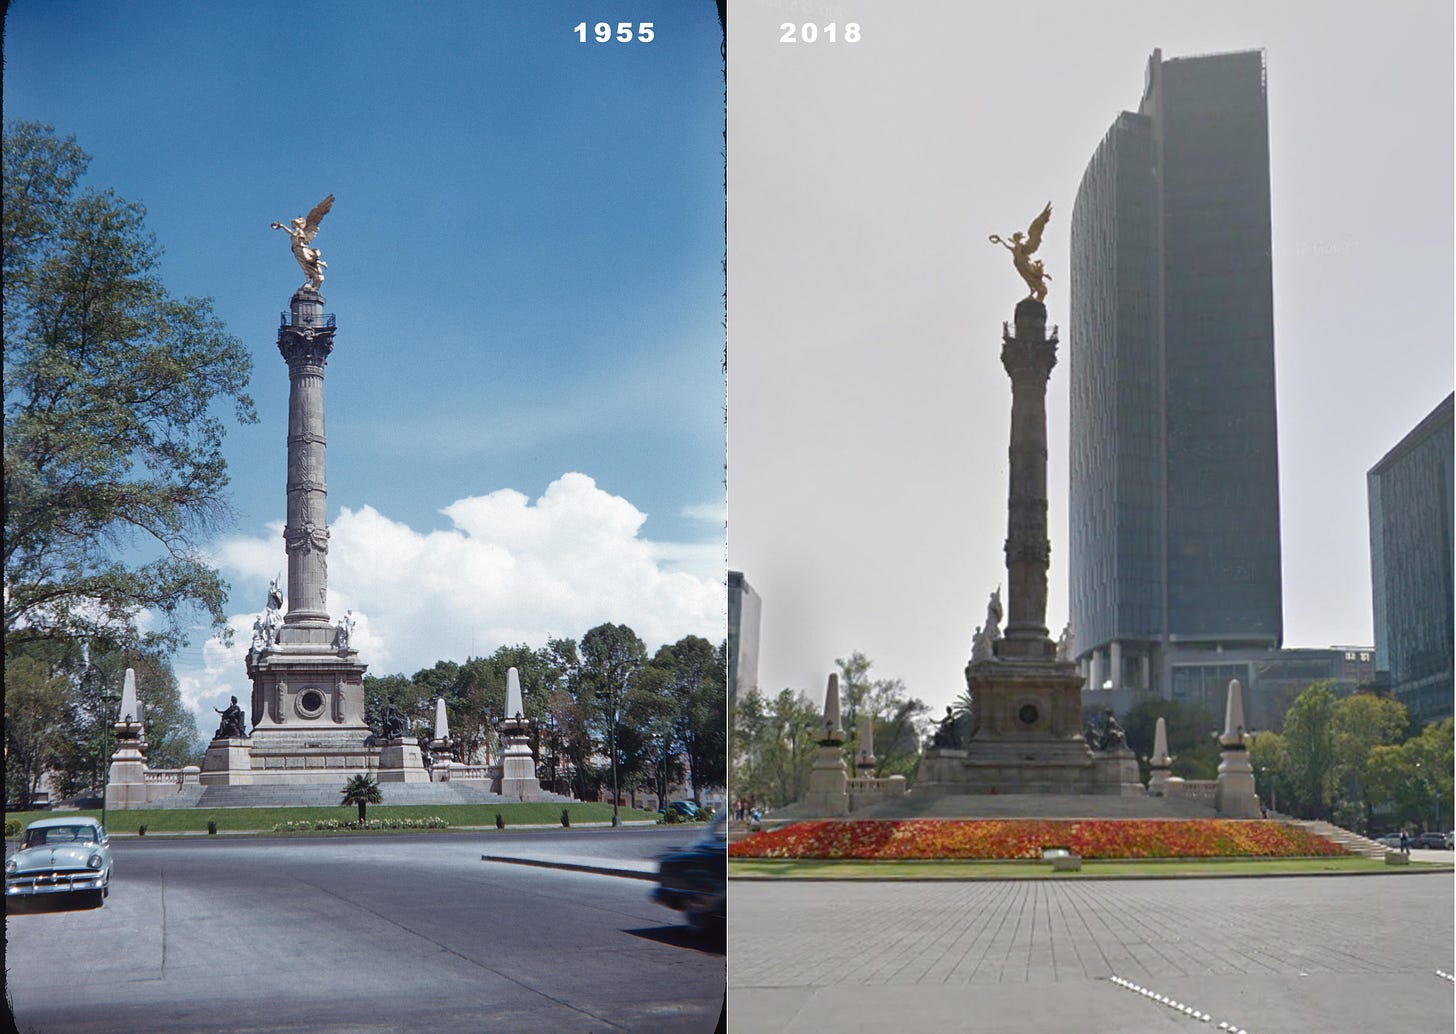 El Ángel in Mexico City 1955 vs. 2018. Back then the smog didn't cover the  sky. : r/OldPhotosInRealLife